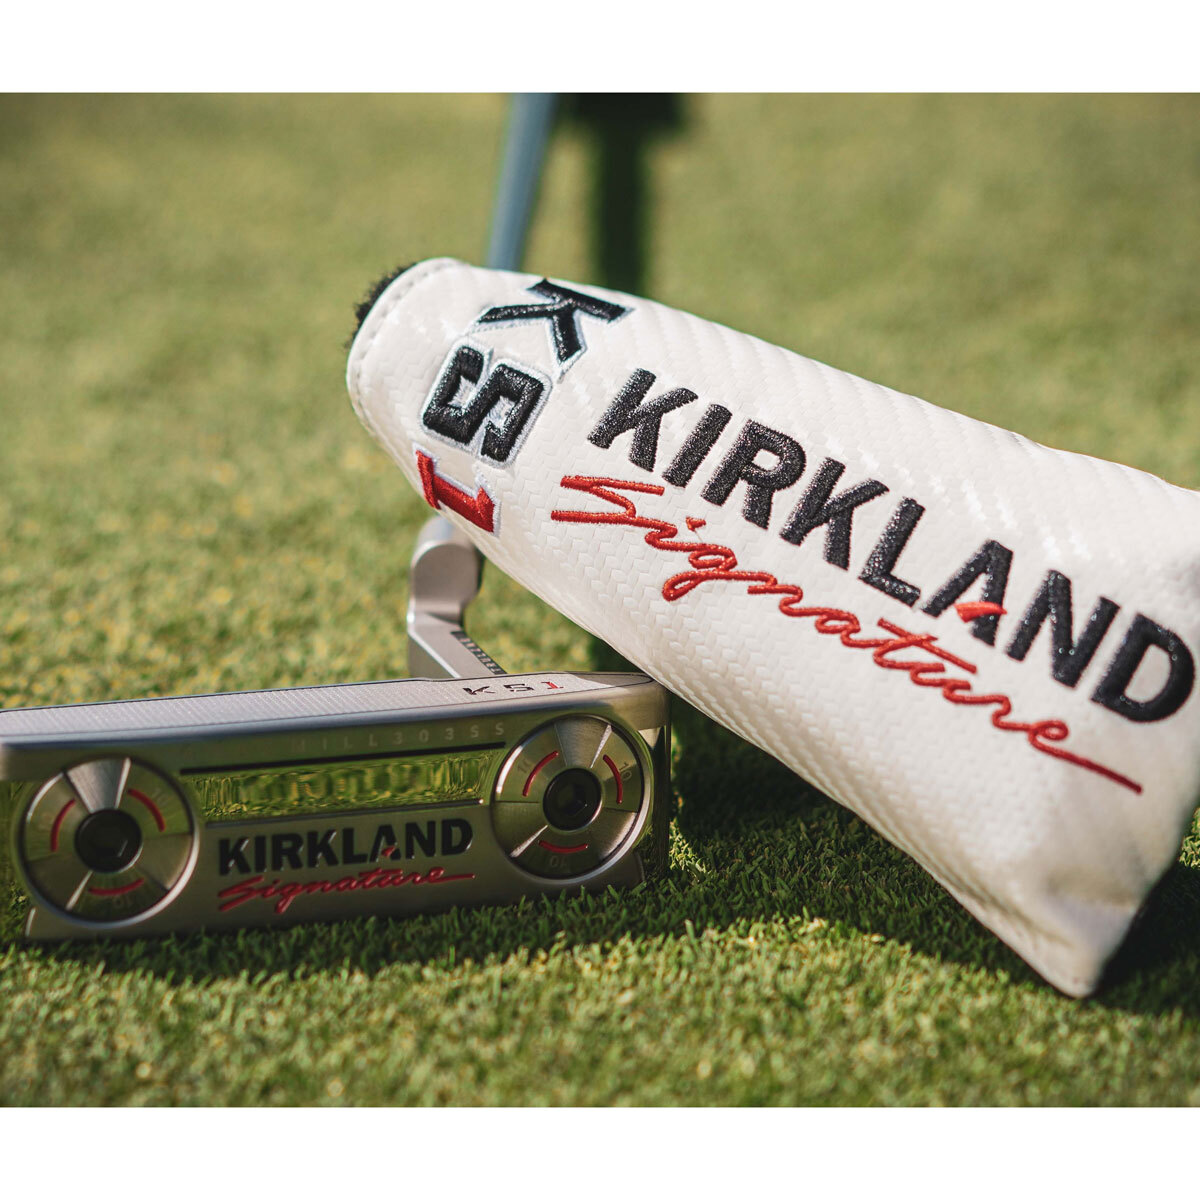 KS Putter with case